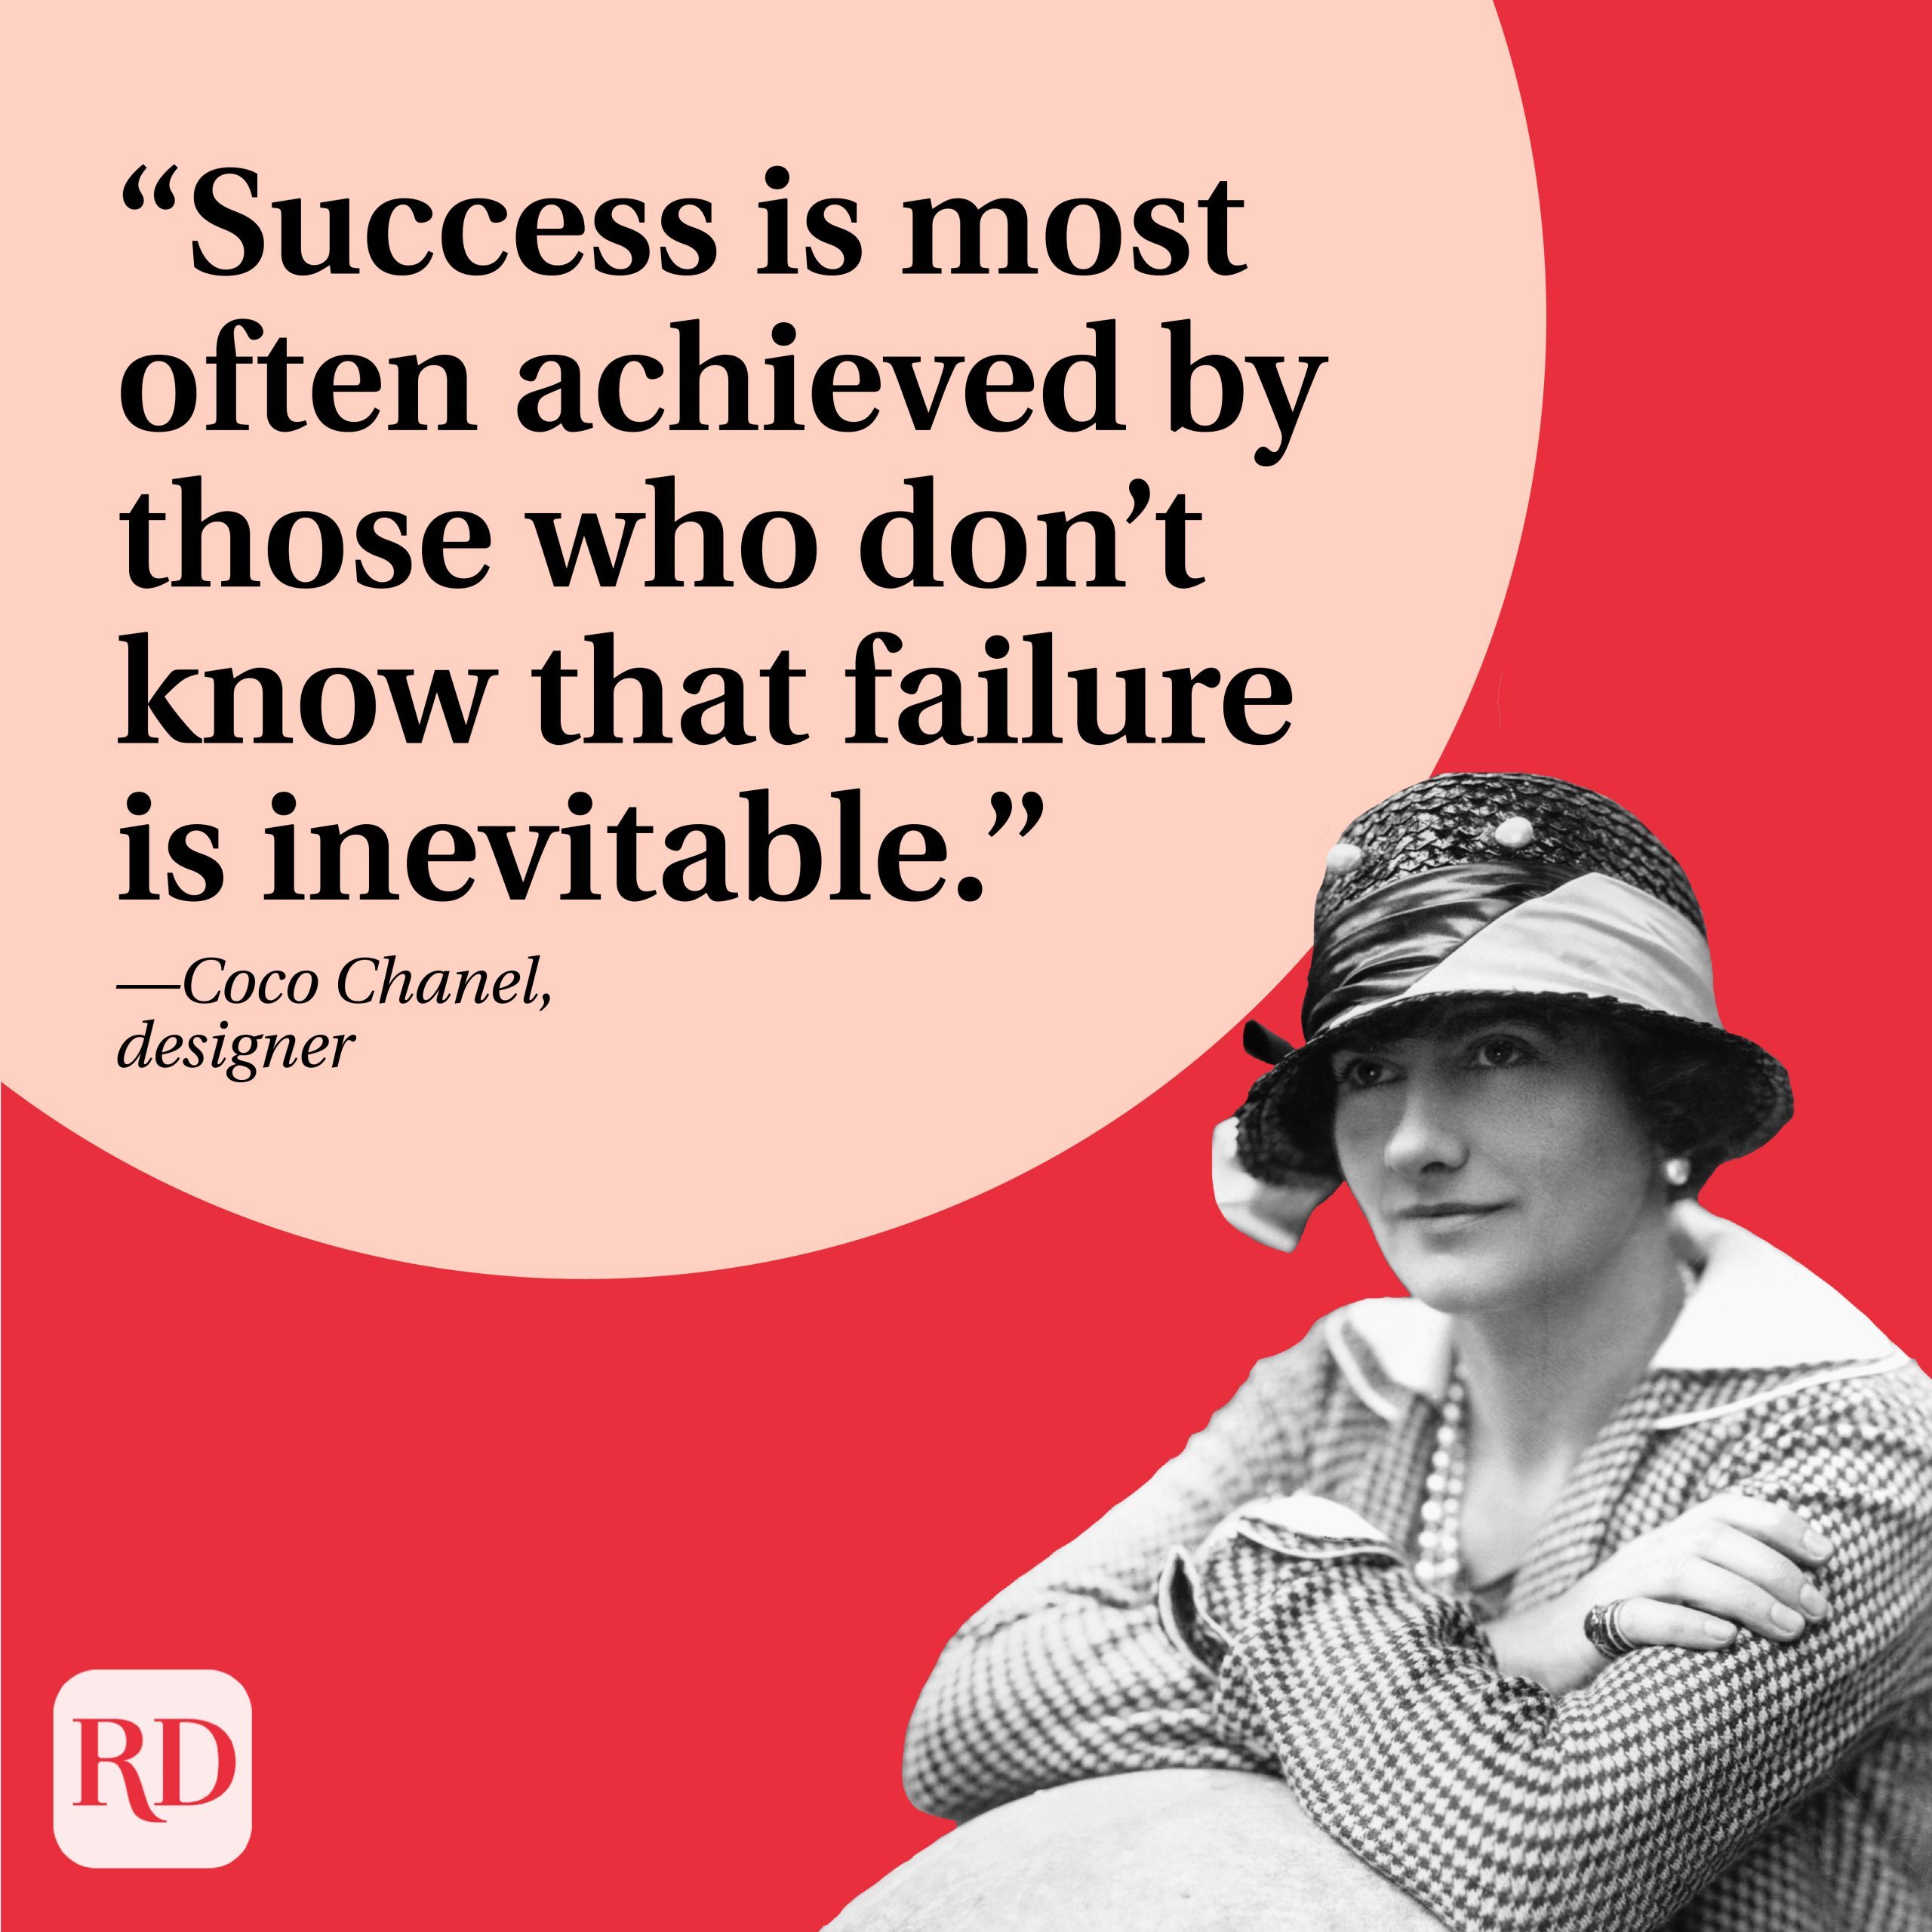 “Success is most often achieved by those who don’t know that failure is inevitable.” —Coco Chanel, designer